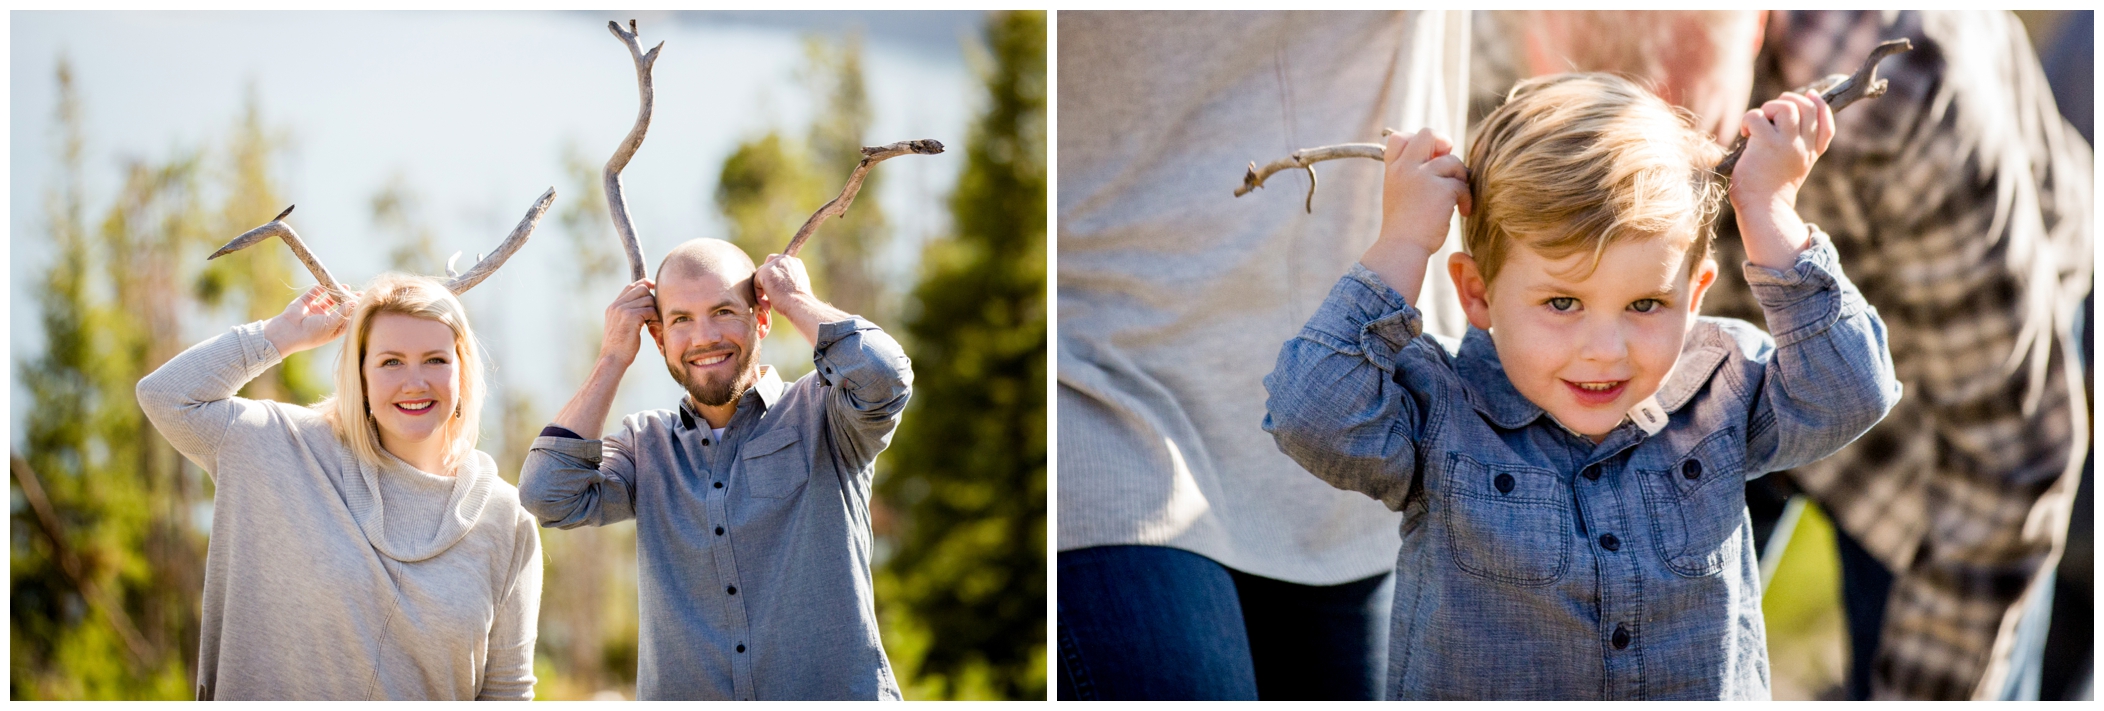 funny family photography inspiration in Breckenridge CO